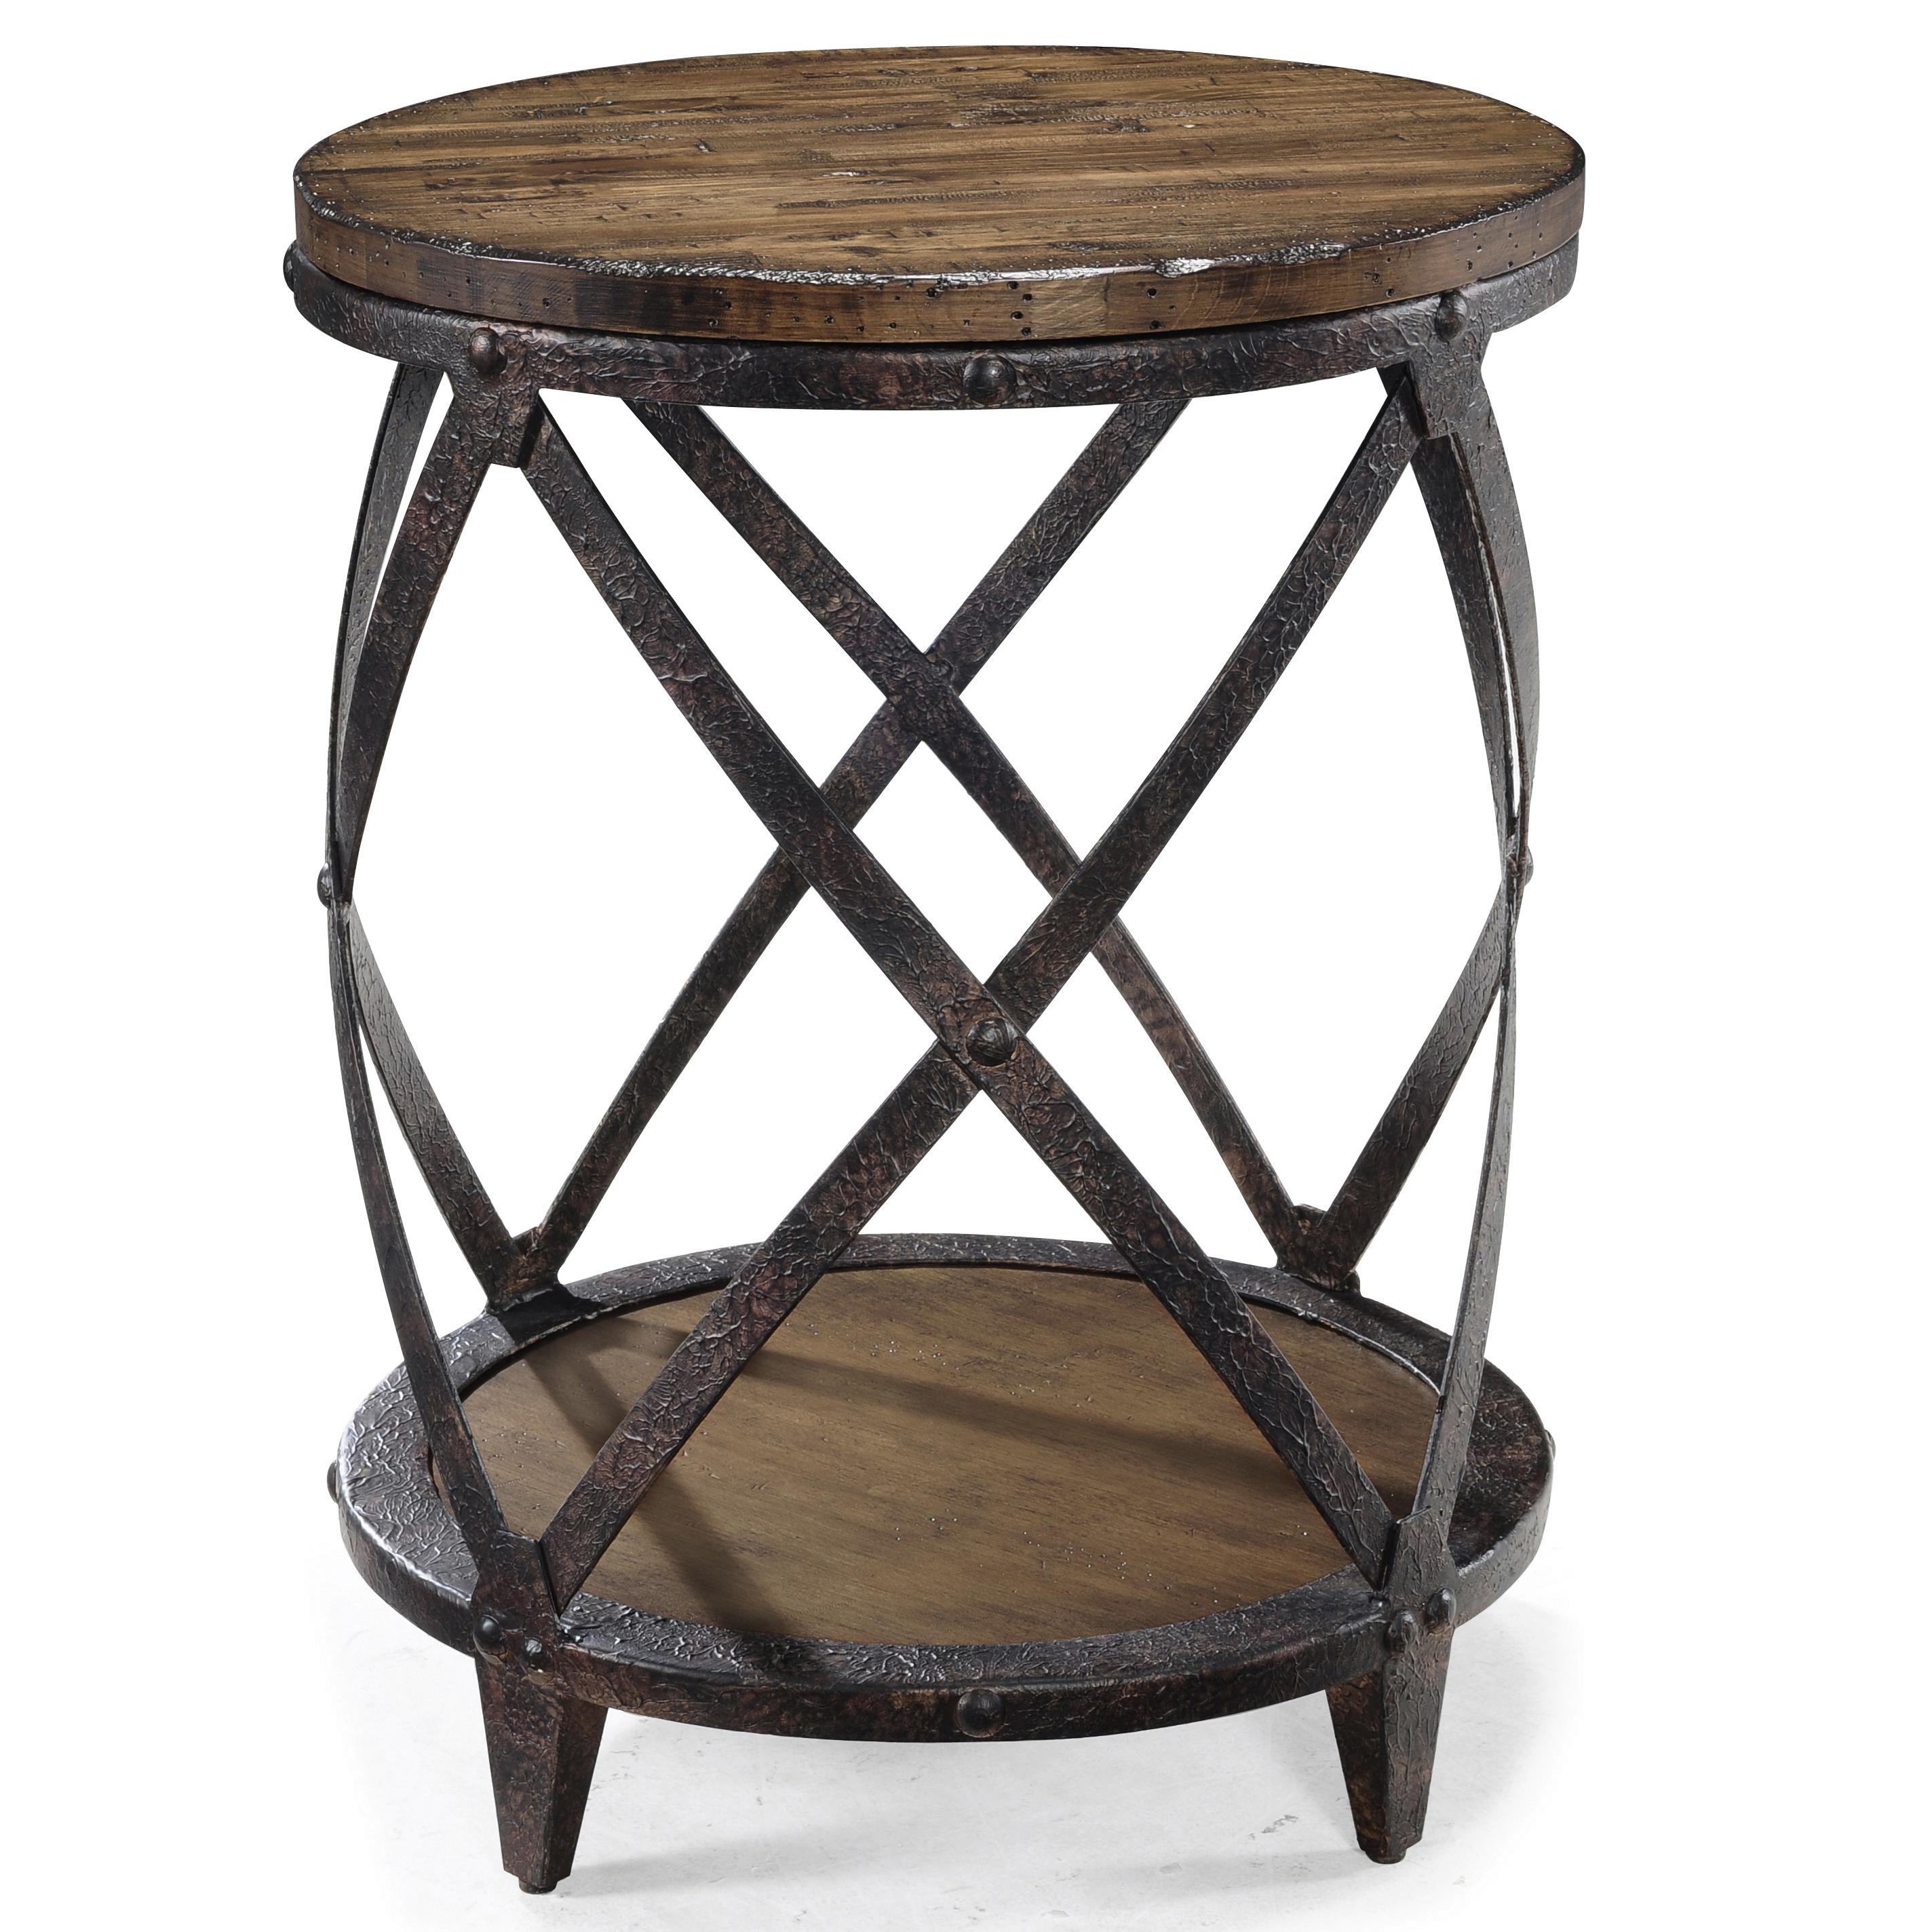 black walnut end table the outrageous beautiful wood round and metal side with storage tables designs cat litter house long thin coffee half circle small chairside vintage trunk